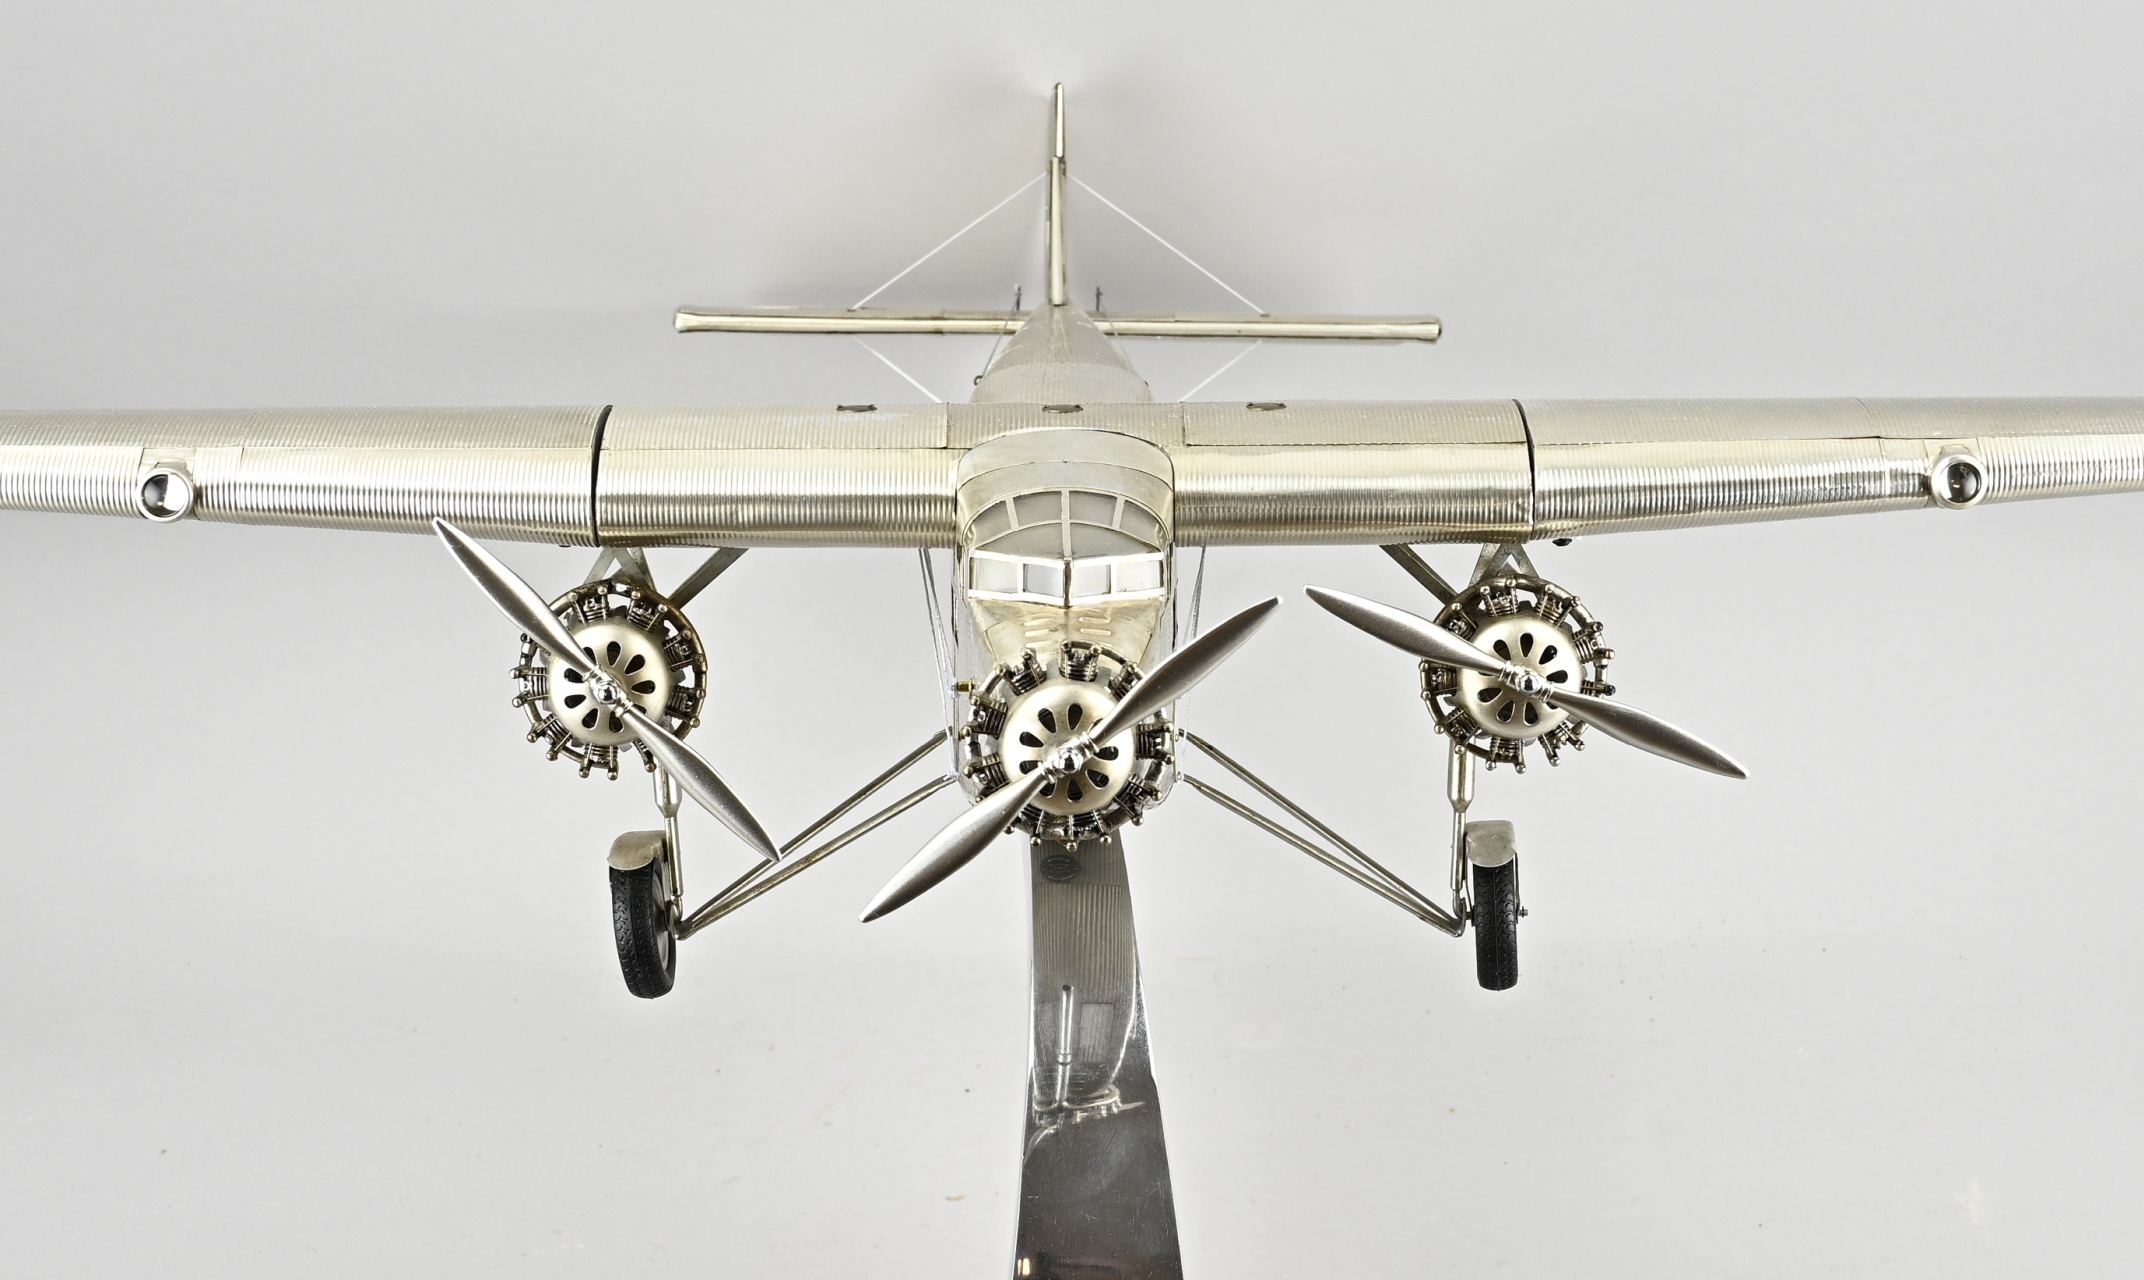 Airplane on stand - Image 3 of 3